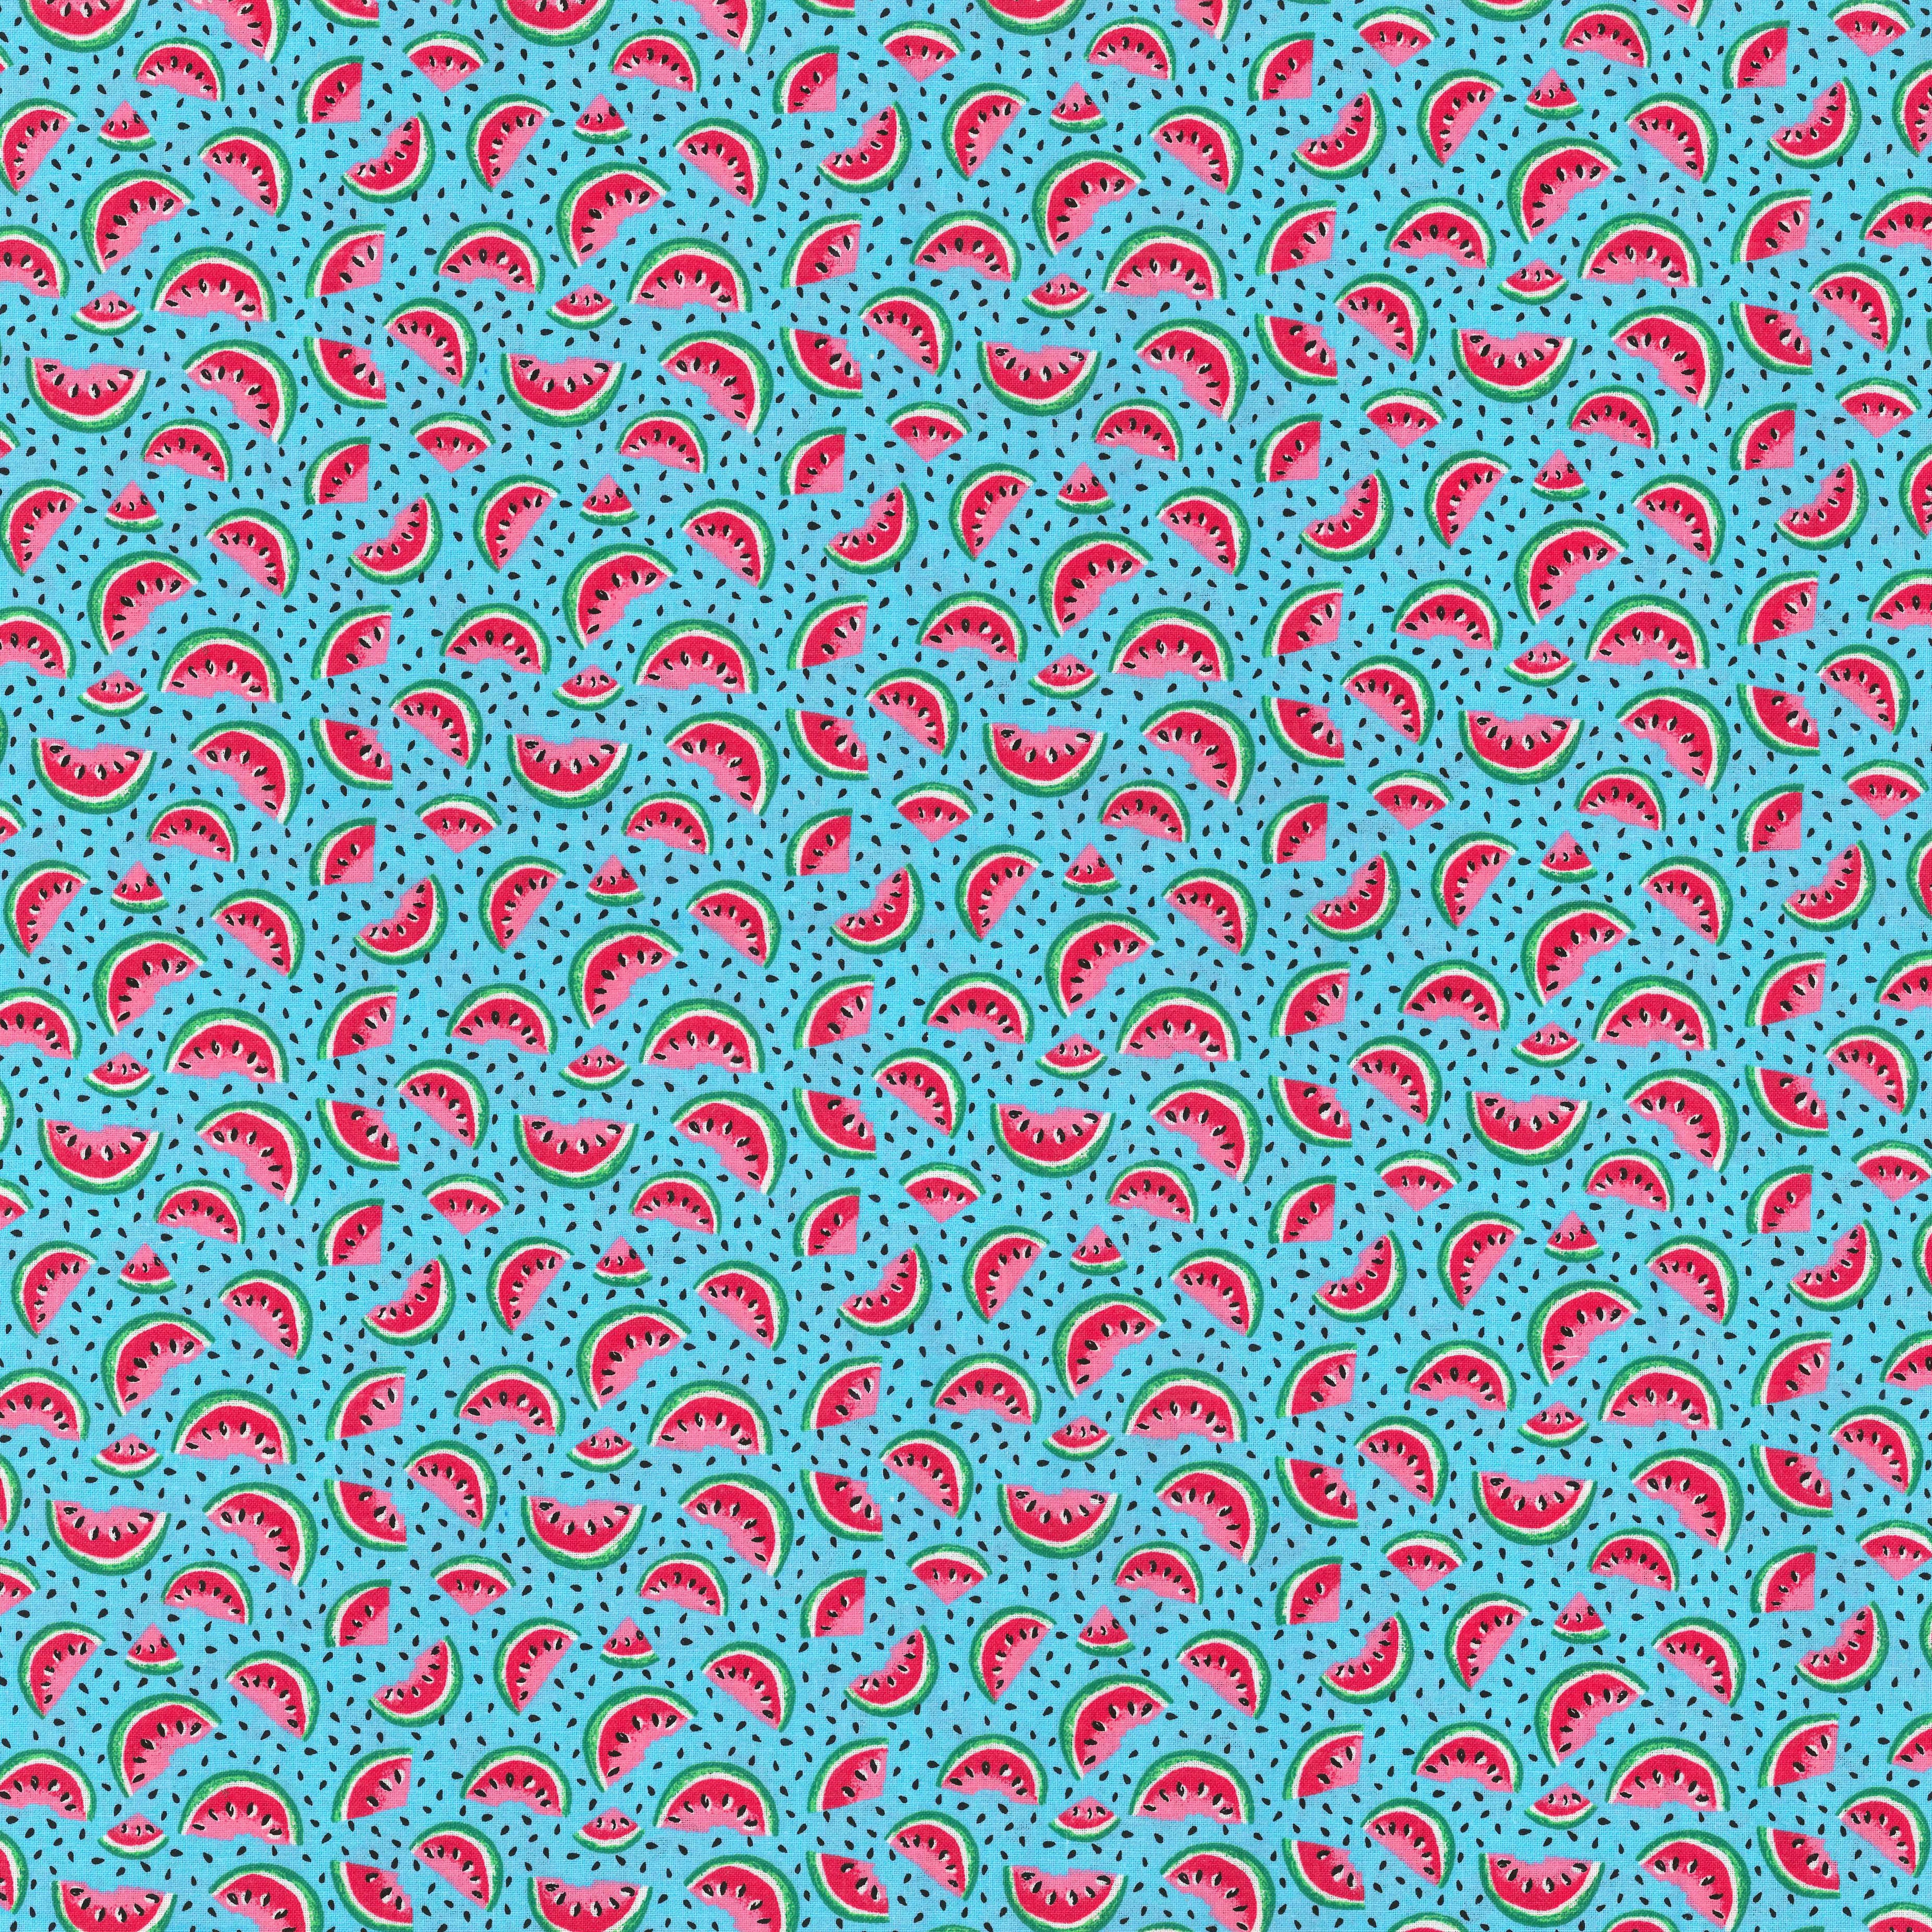 Fabric Traditions Watermelon Toss Cotton Fabric